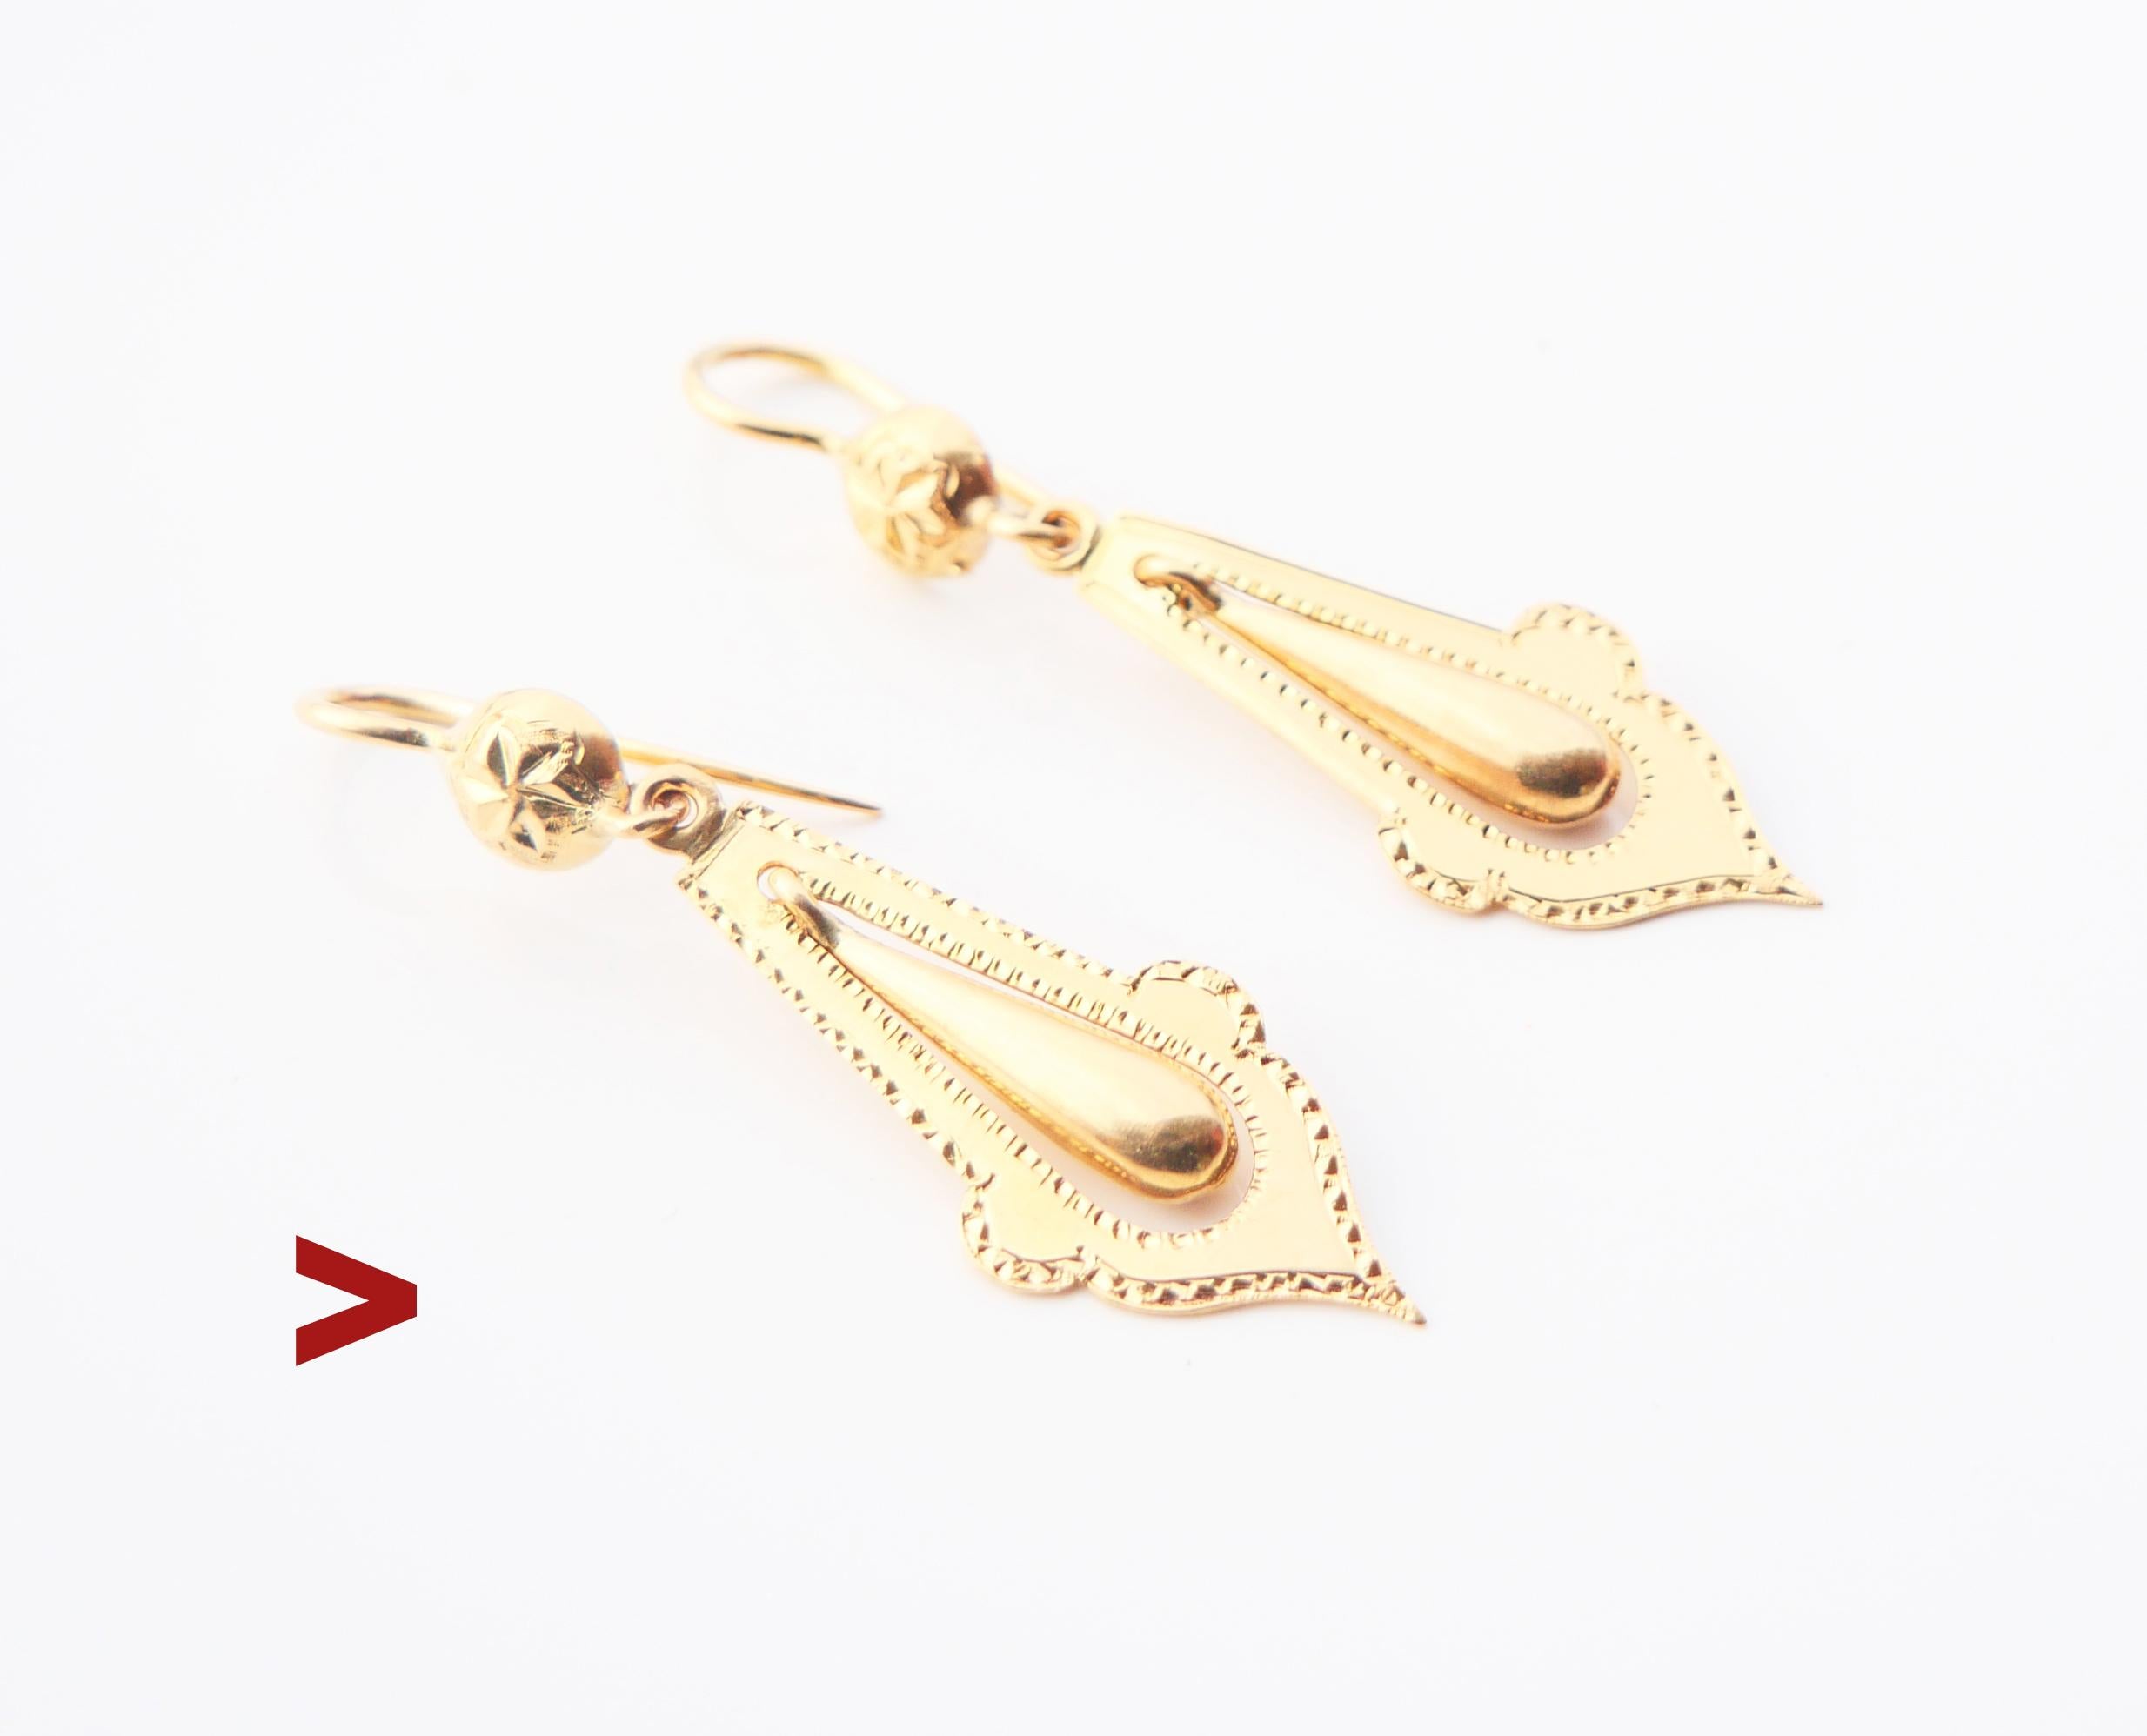 A pair of antique Viking Revival styled earrings with drop-shaped hollow pendants freely suspended within leaf - shaped frames decorated with  delicate hand- engraved ornaments on frontal sides.

Swedish hallmarks on both marked 18K Gold.

Maker's